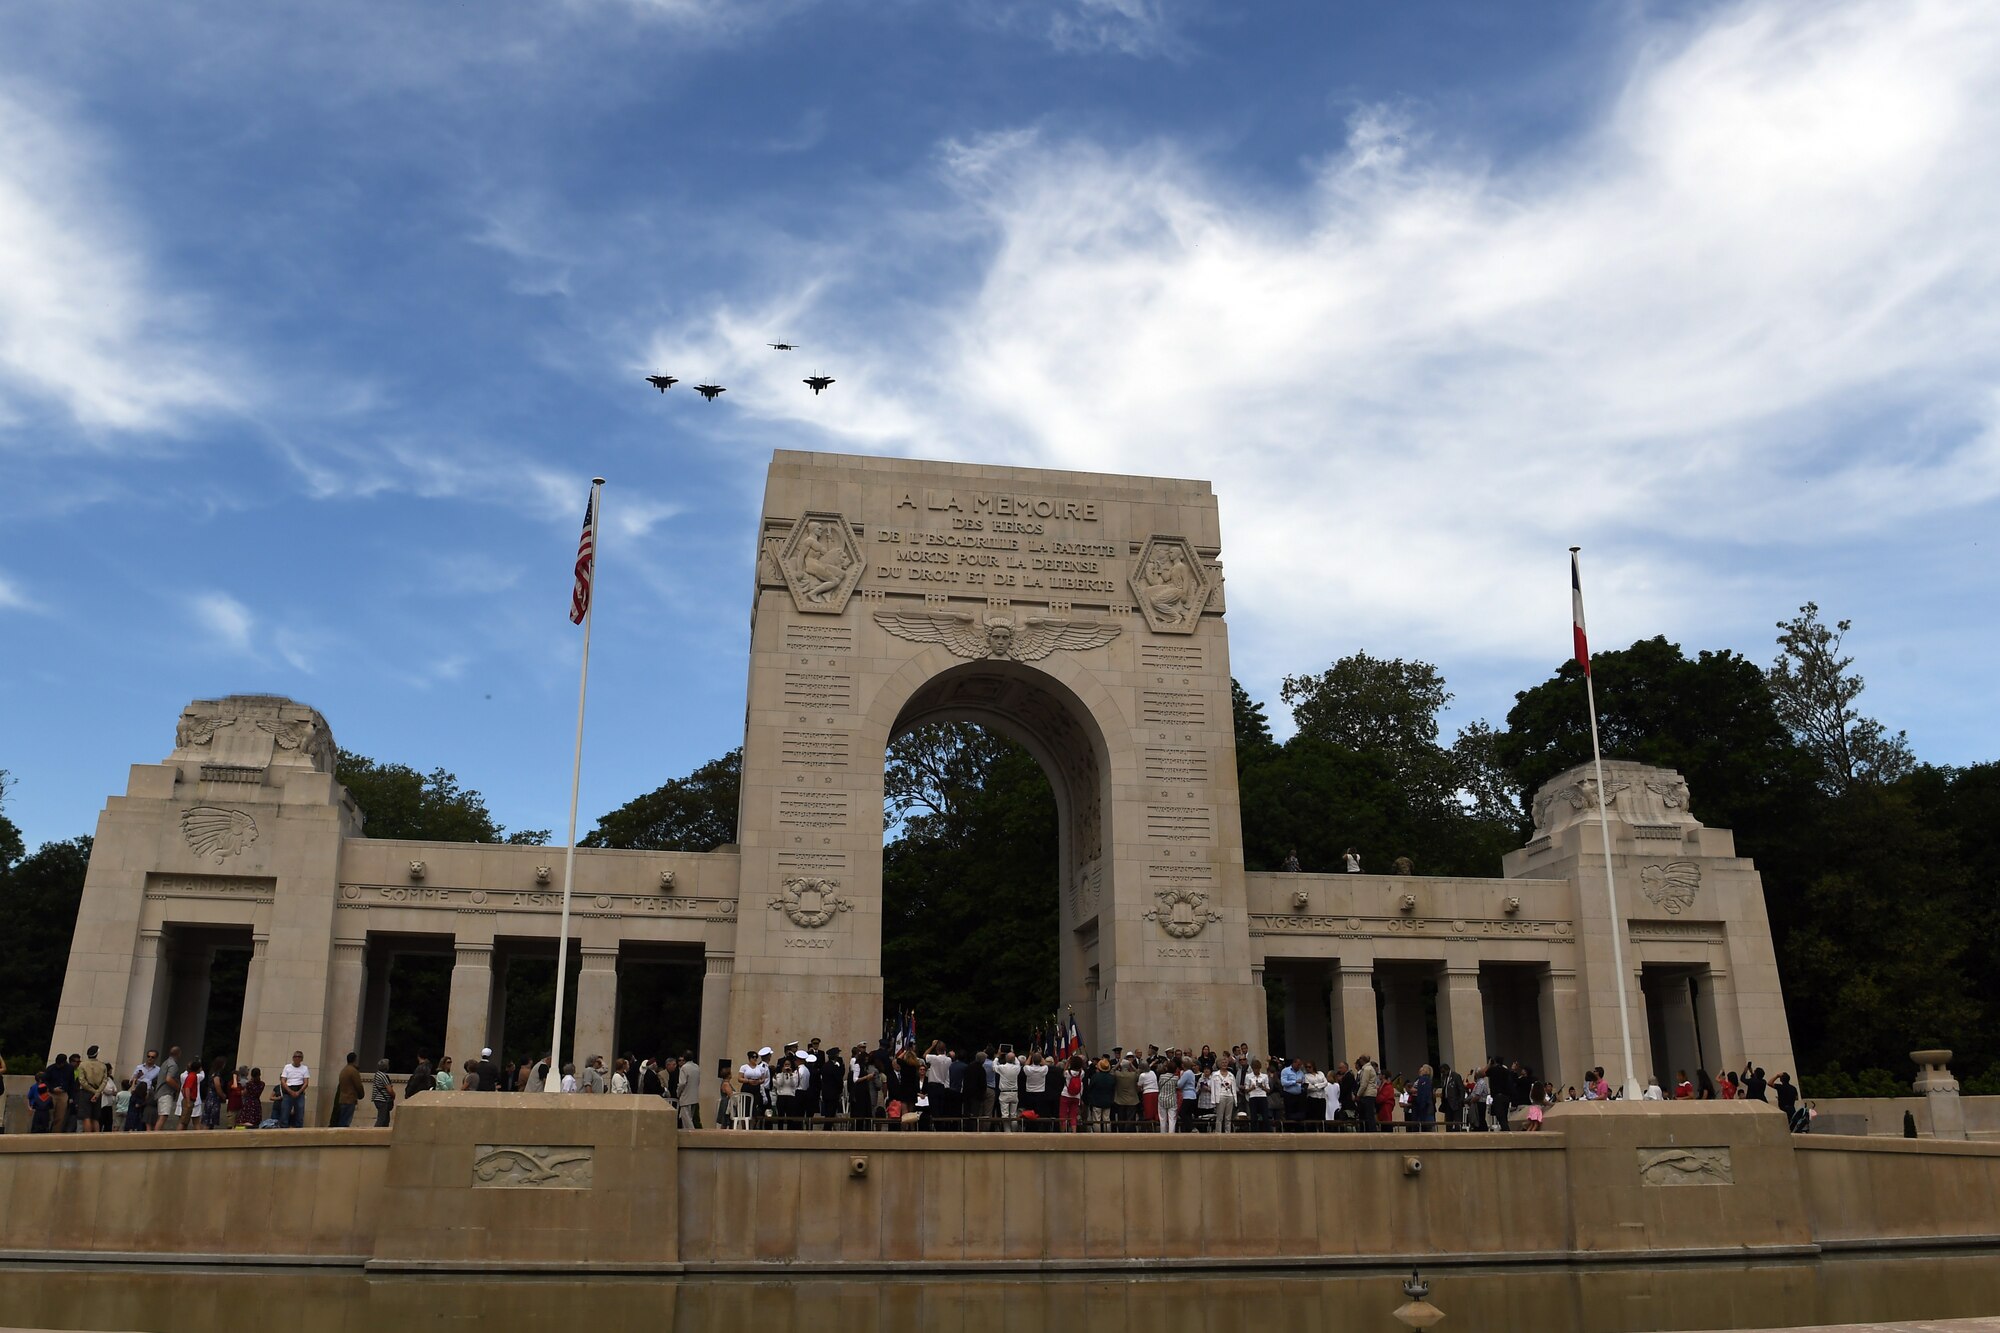 Four F-15 fighters fly in formation over the Lafayette Escadrille Memorial.